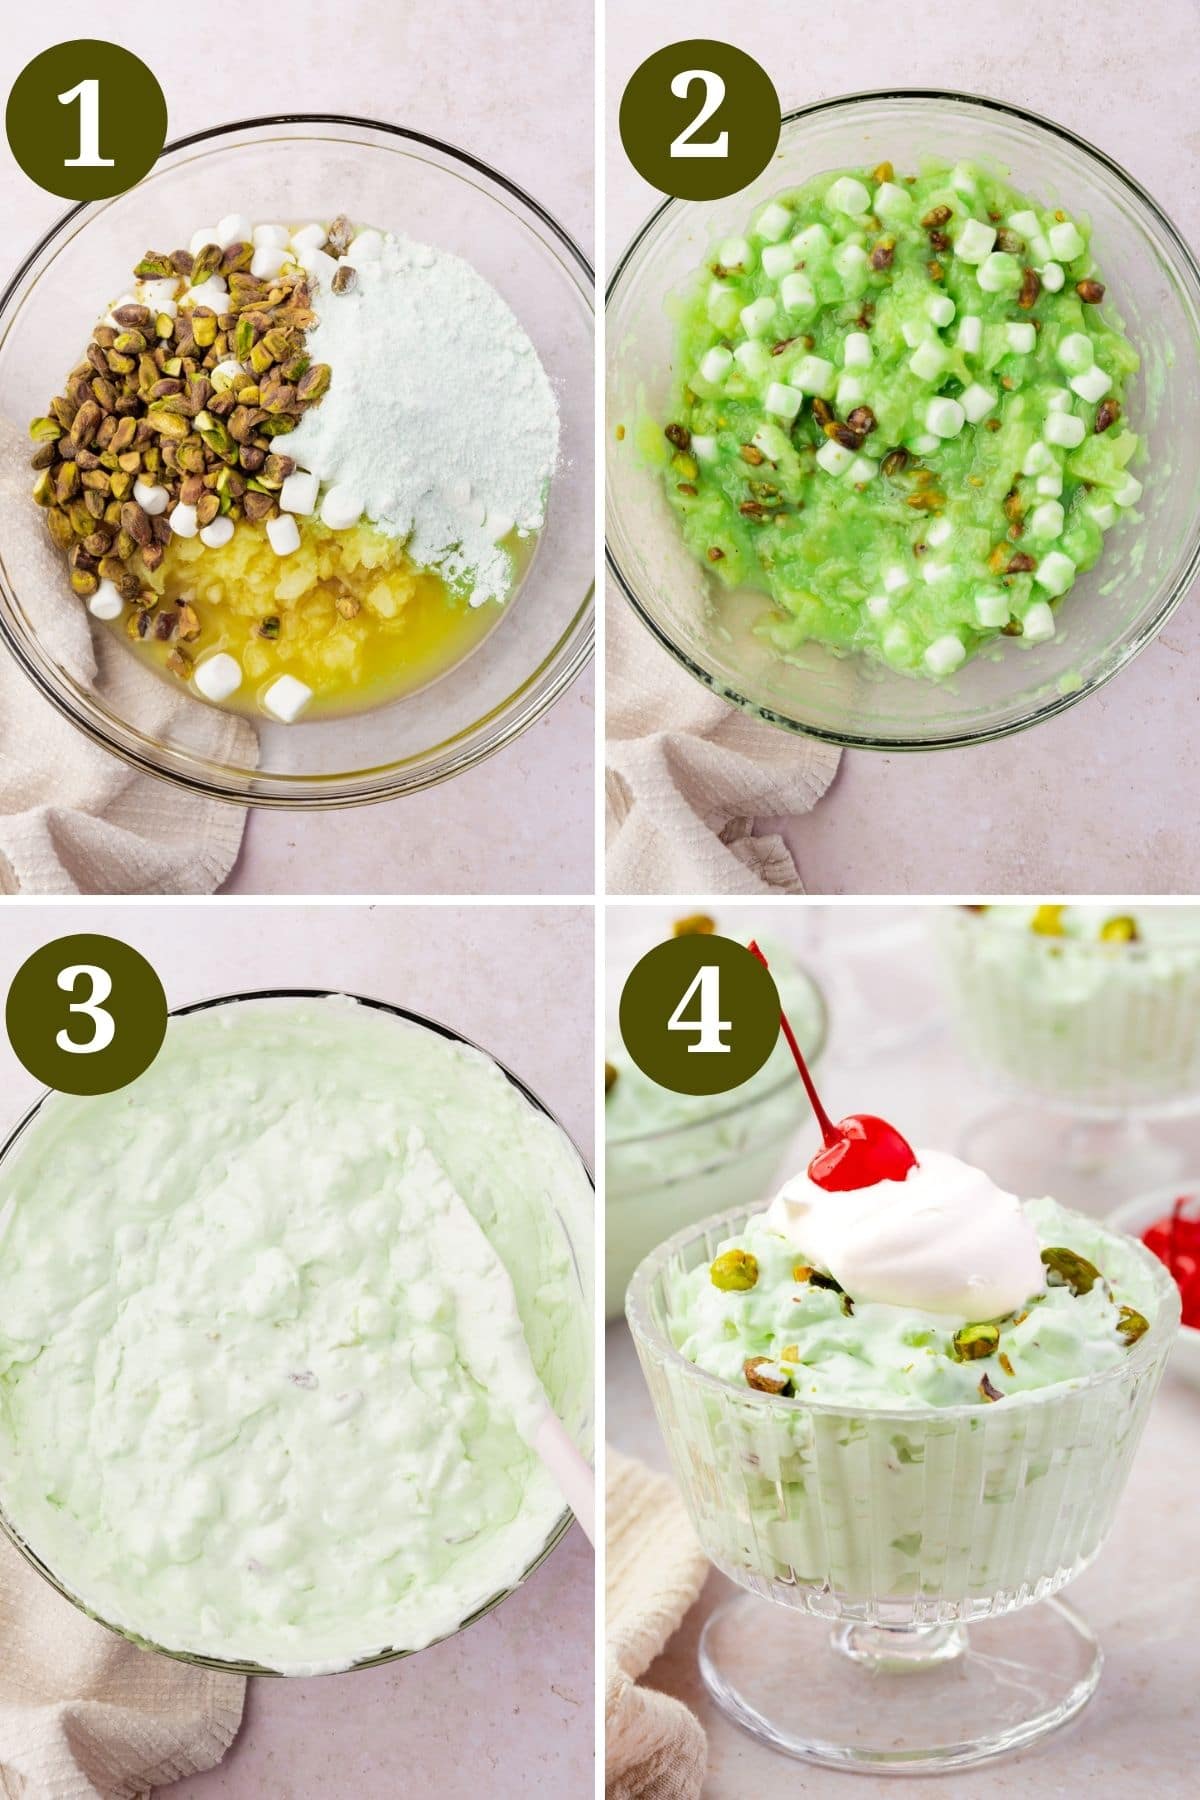 Steps 1-4 for making watergate salad.